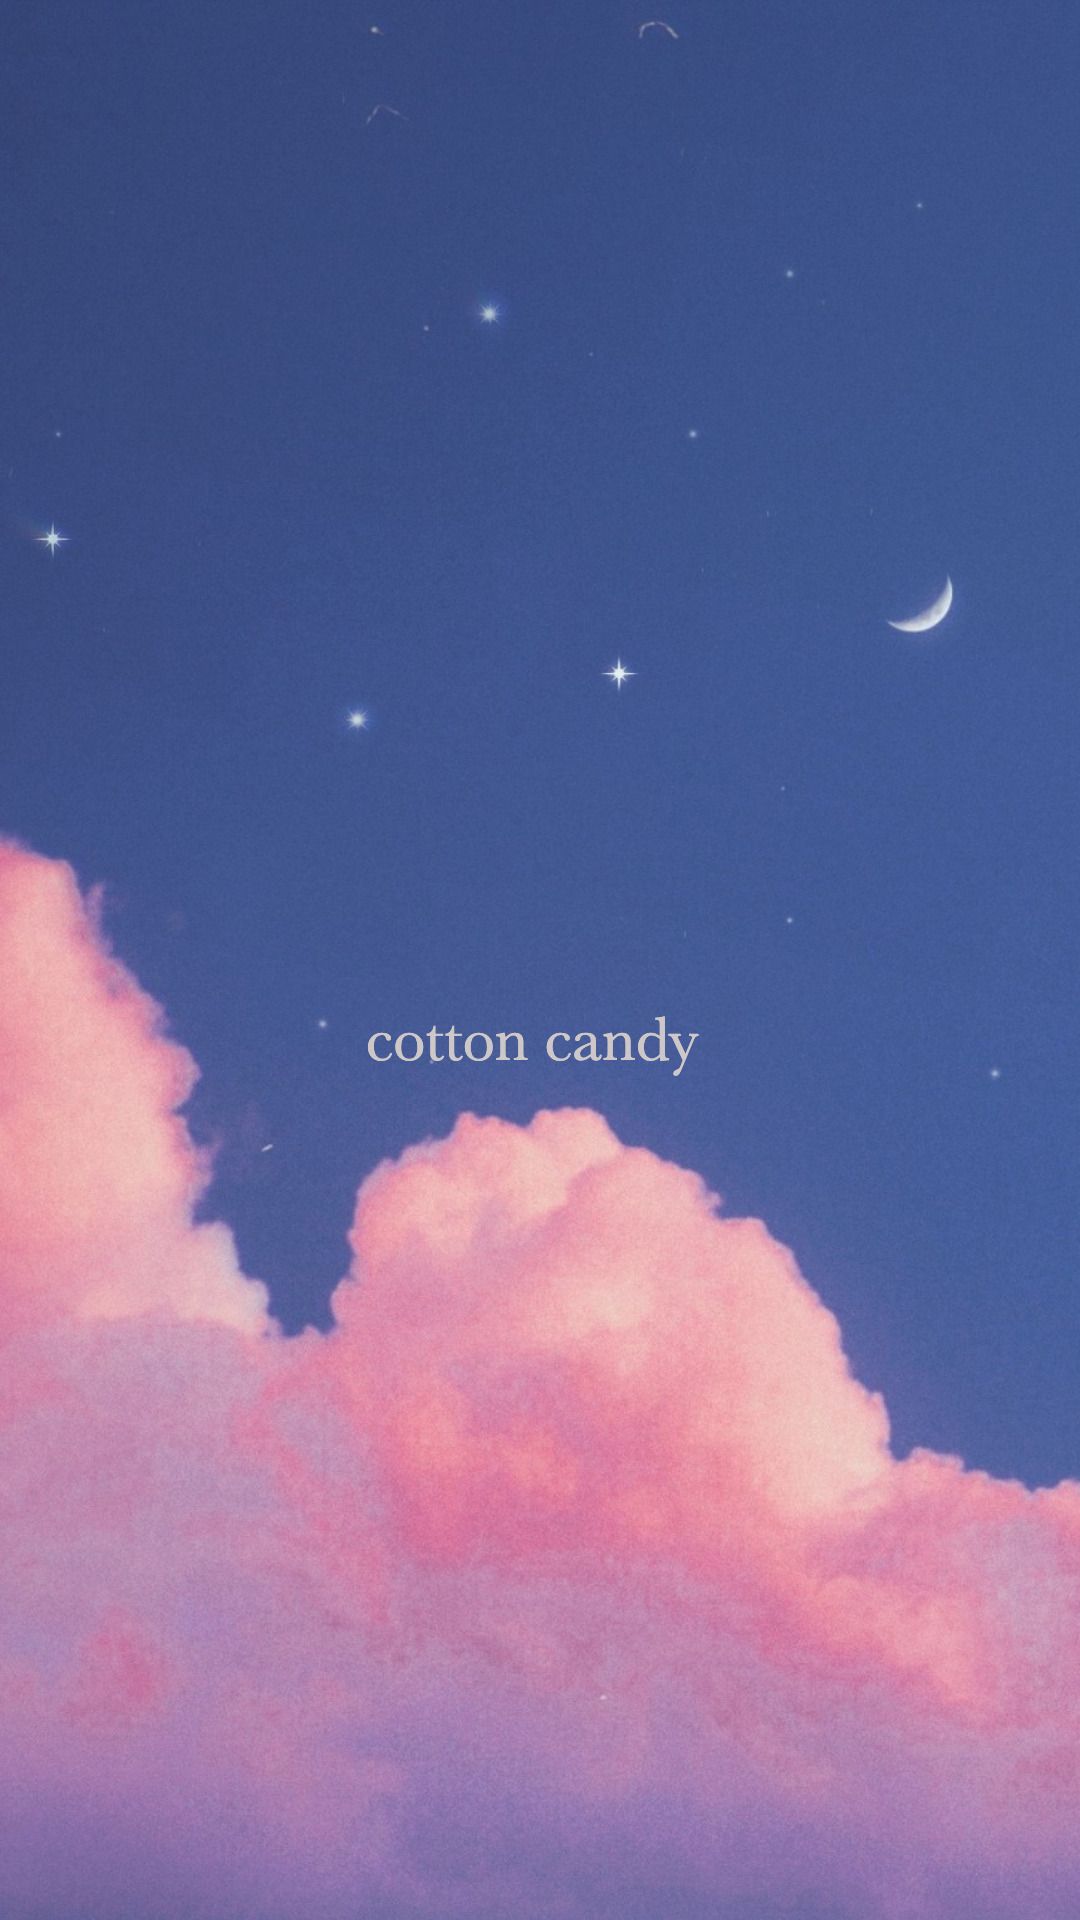 A sky with clouds and the moon in it - Candy, Florida